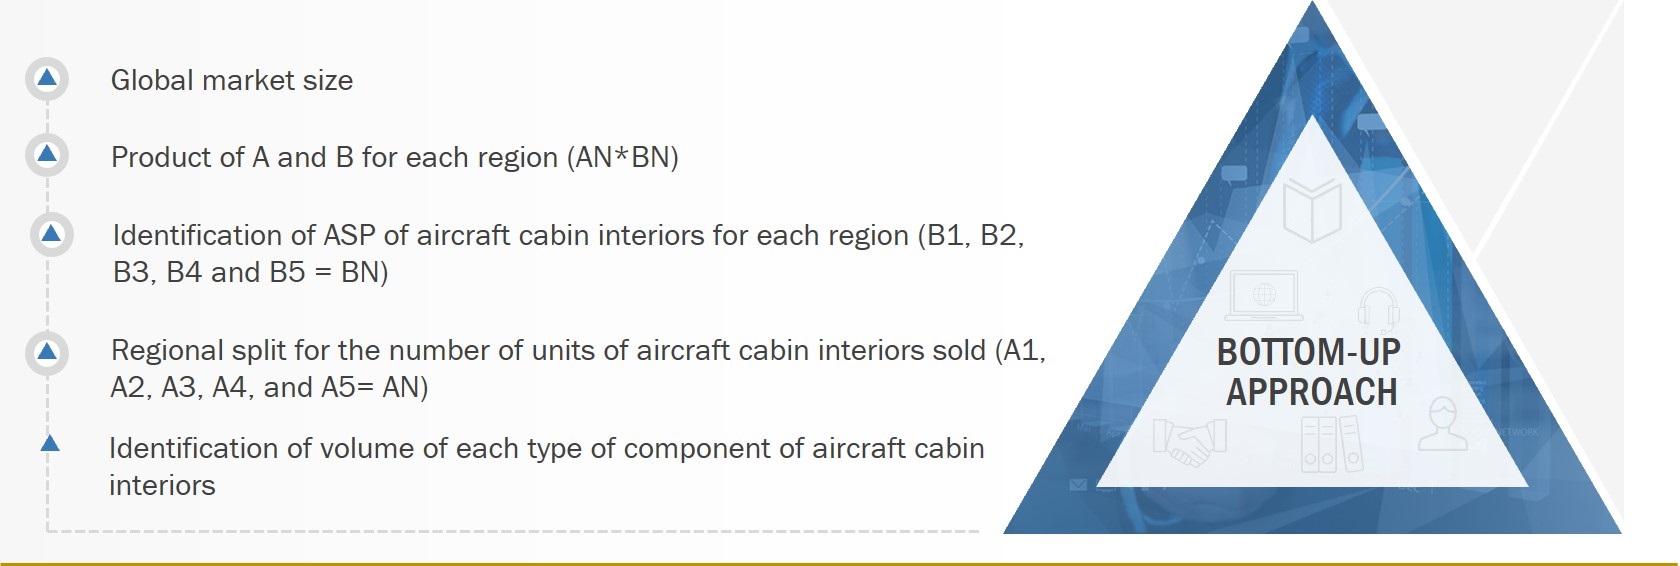 Aircraft Cabin Interiors Market Size, and Bottom-Up Approach 